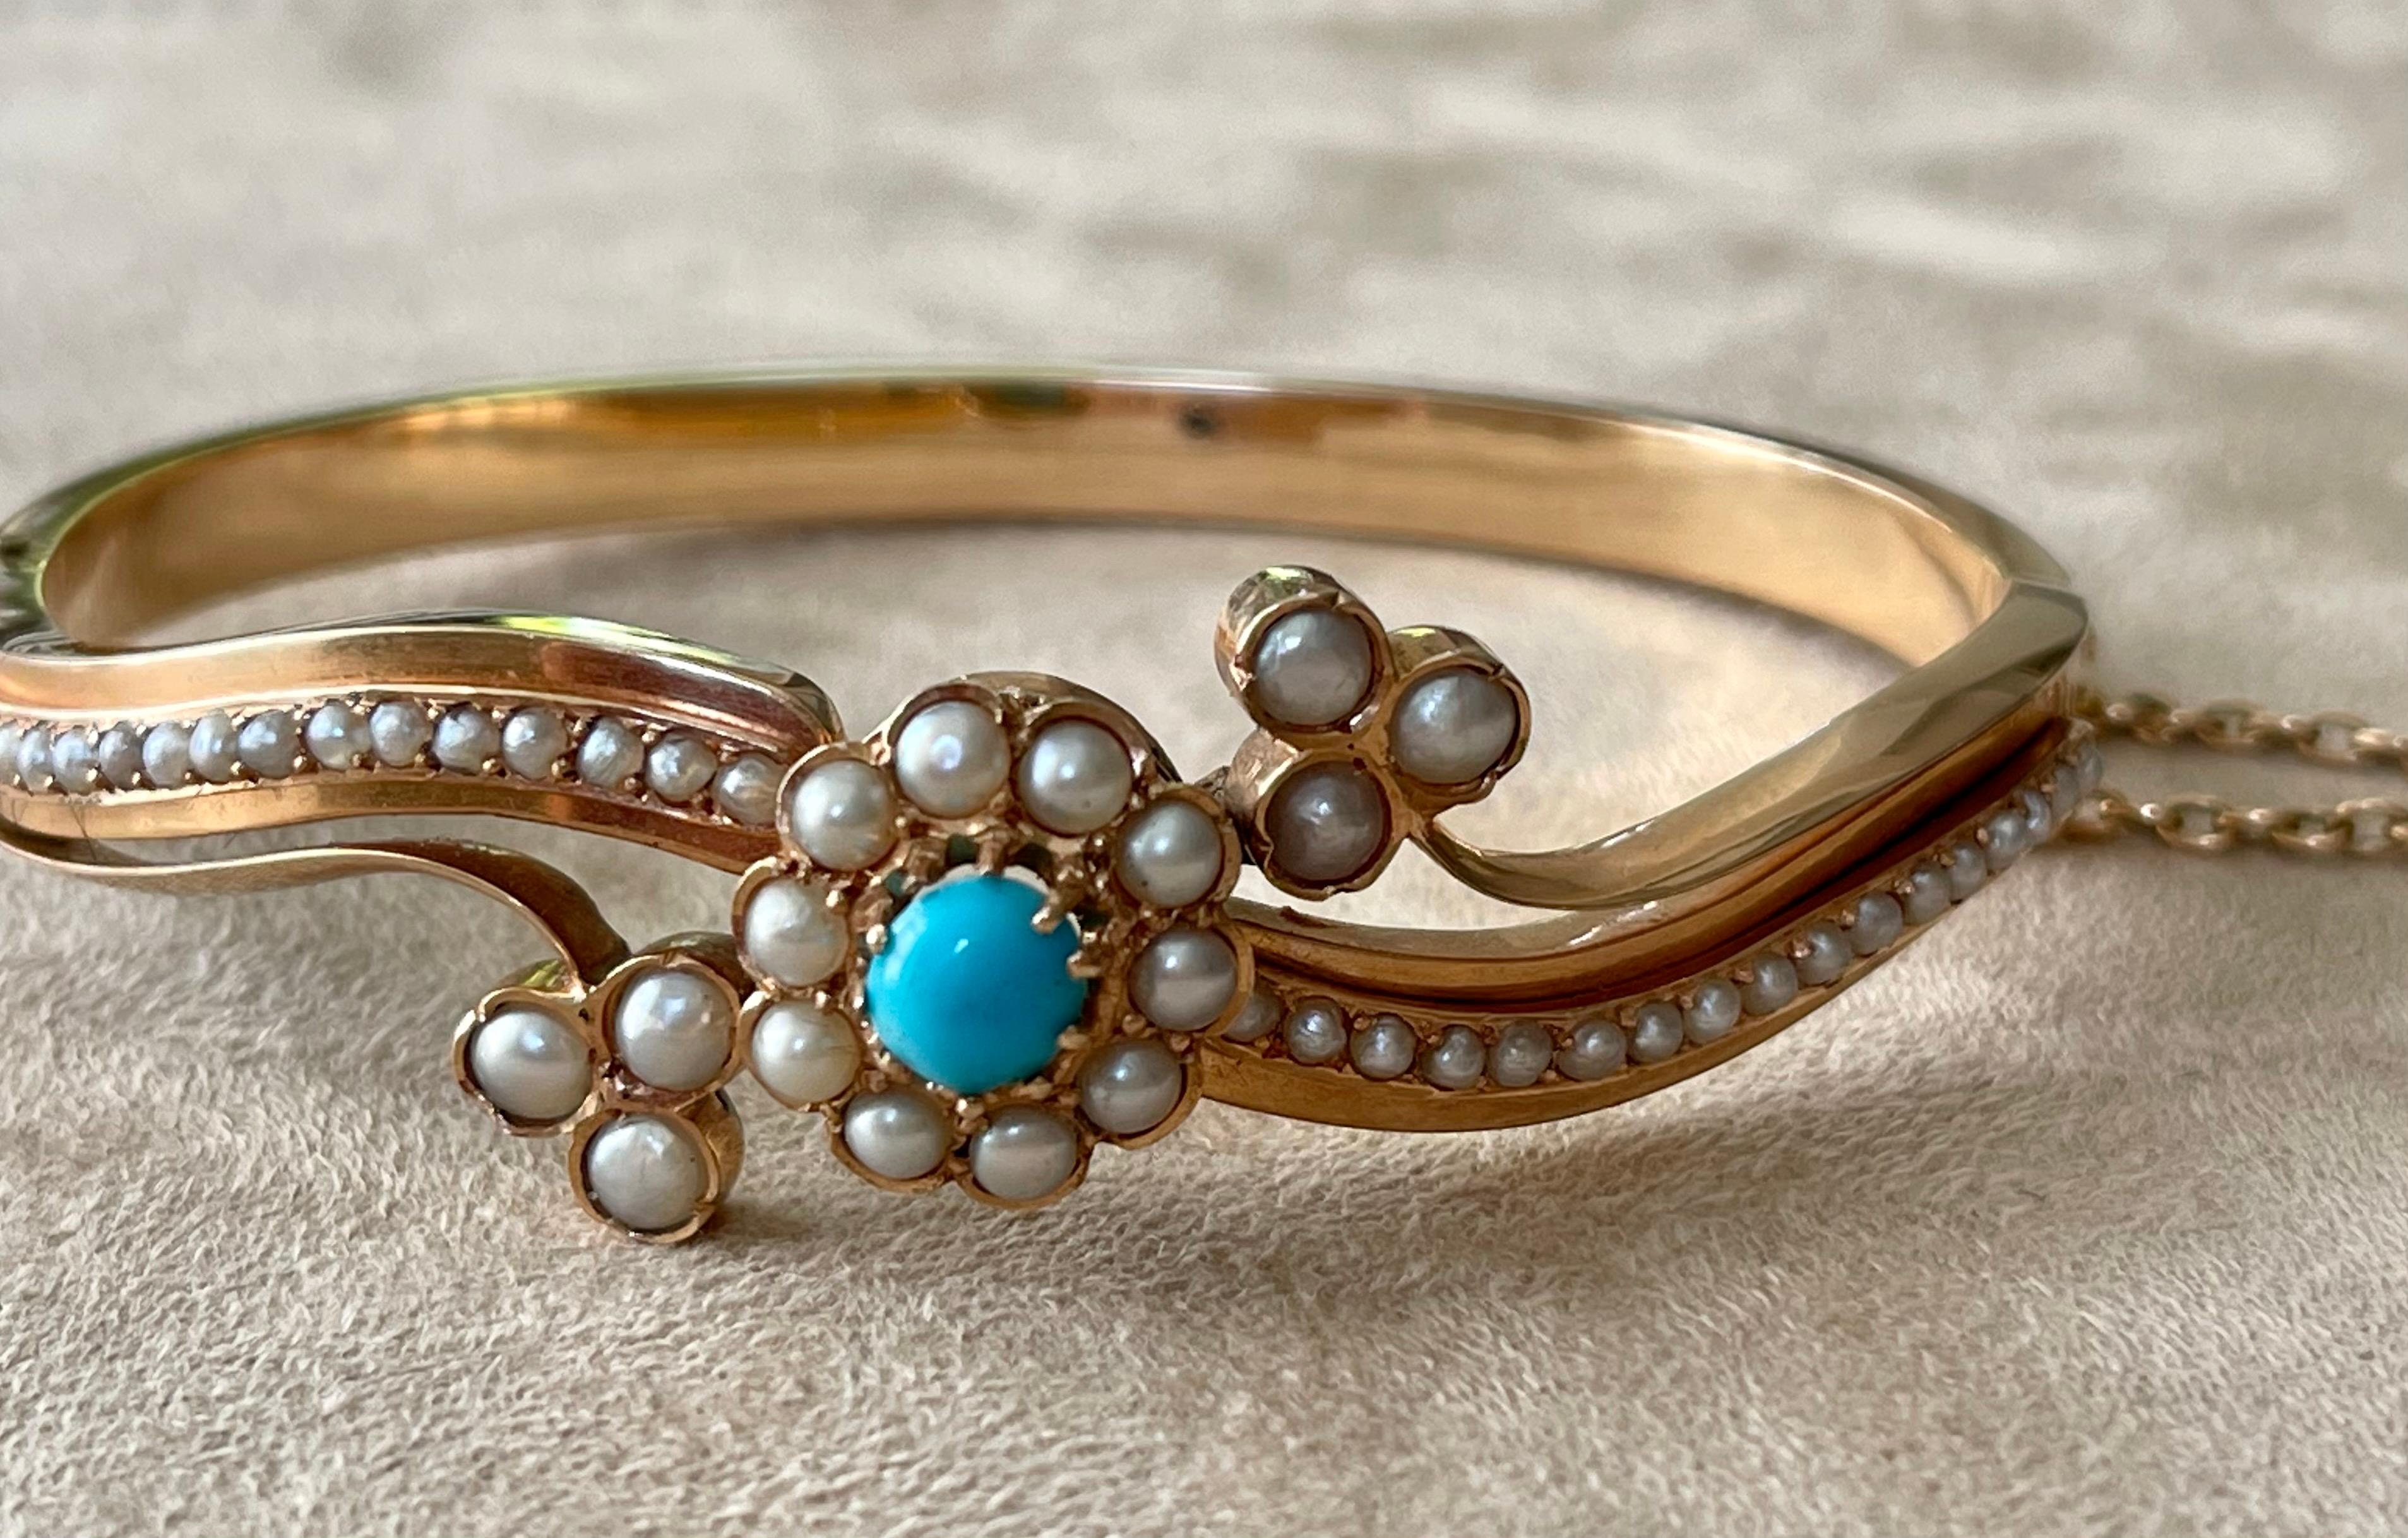 If the Victorian style makes your heart tremble, consider this Antique  Victorian Bangle Bracelet in 14 K rose Gold featuring a natural Turquoise and seedpearls. 
The bangle secures with an integrated push fit catch to one side and benefits from the